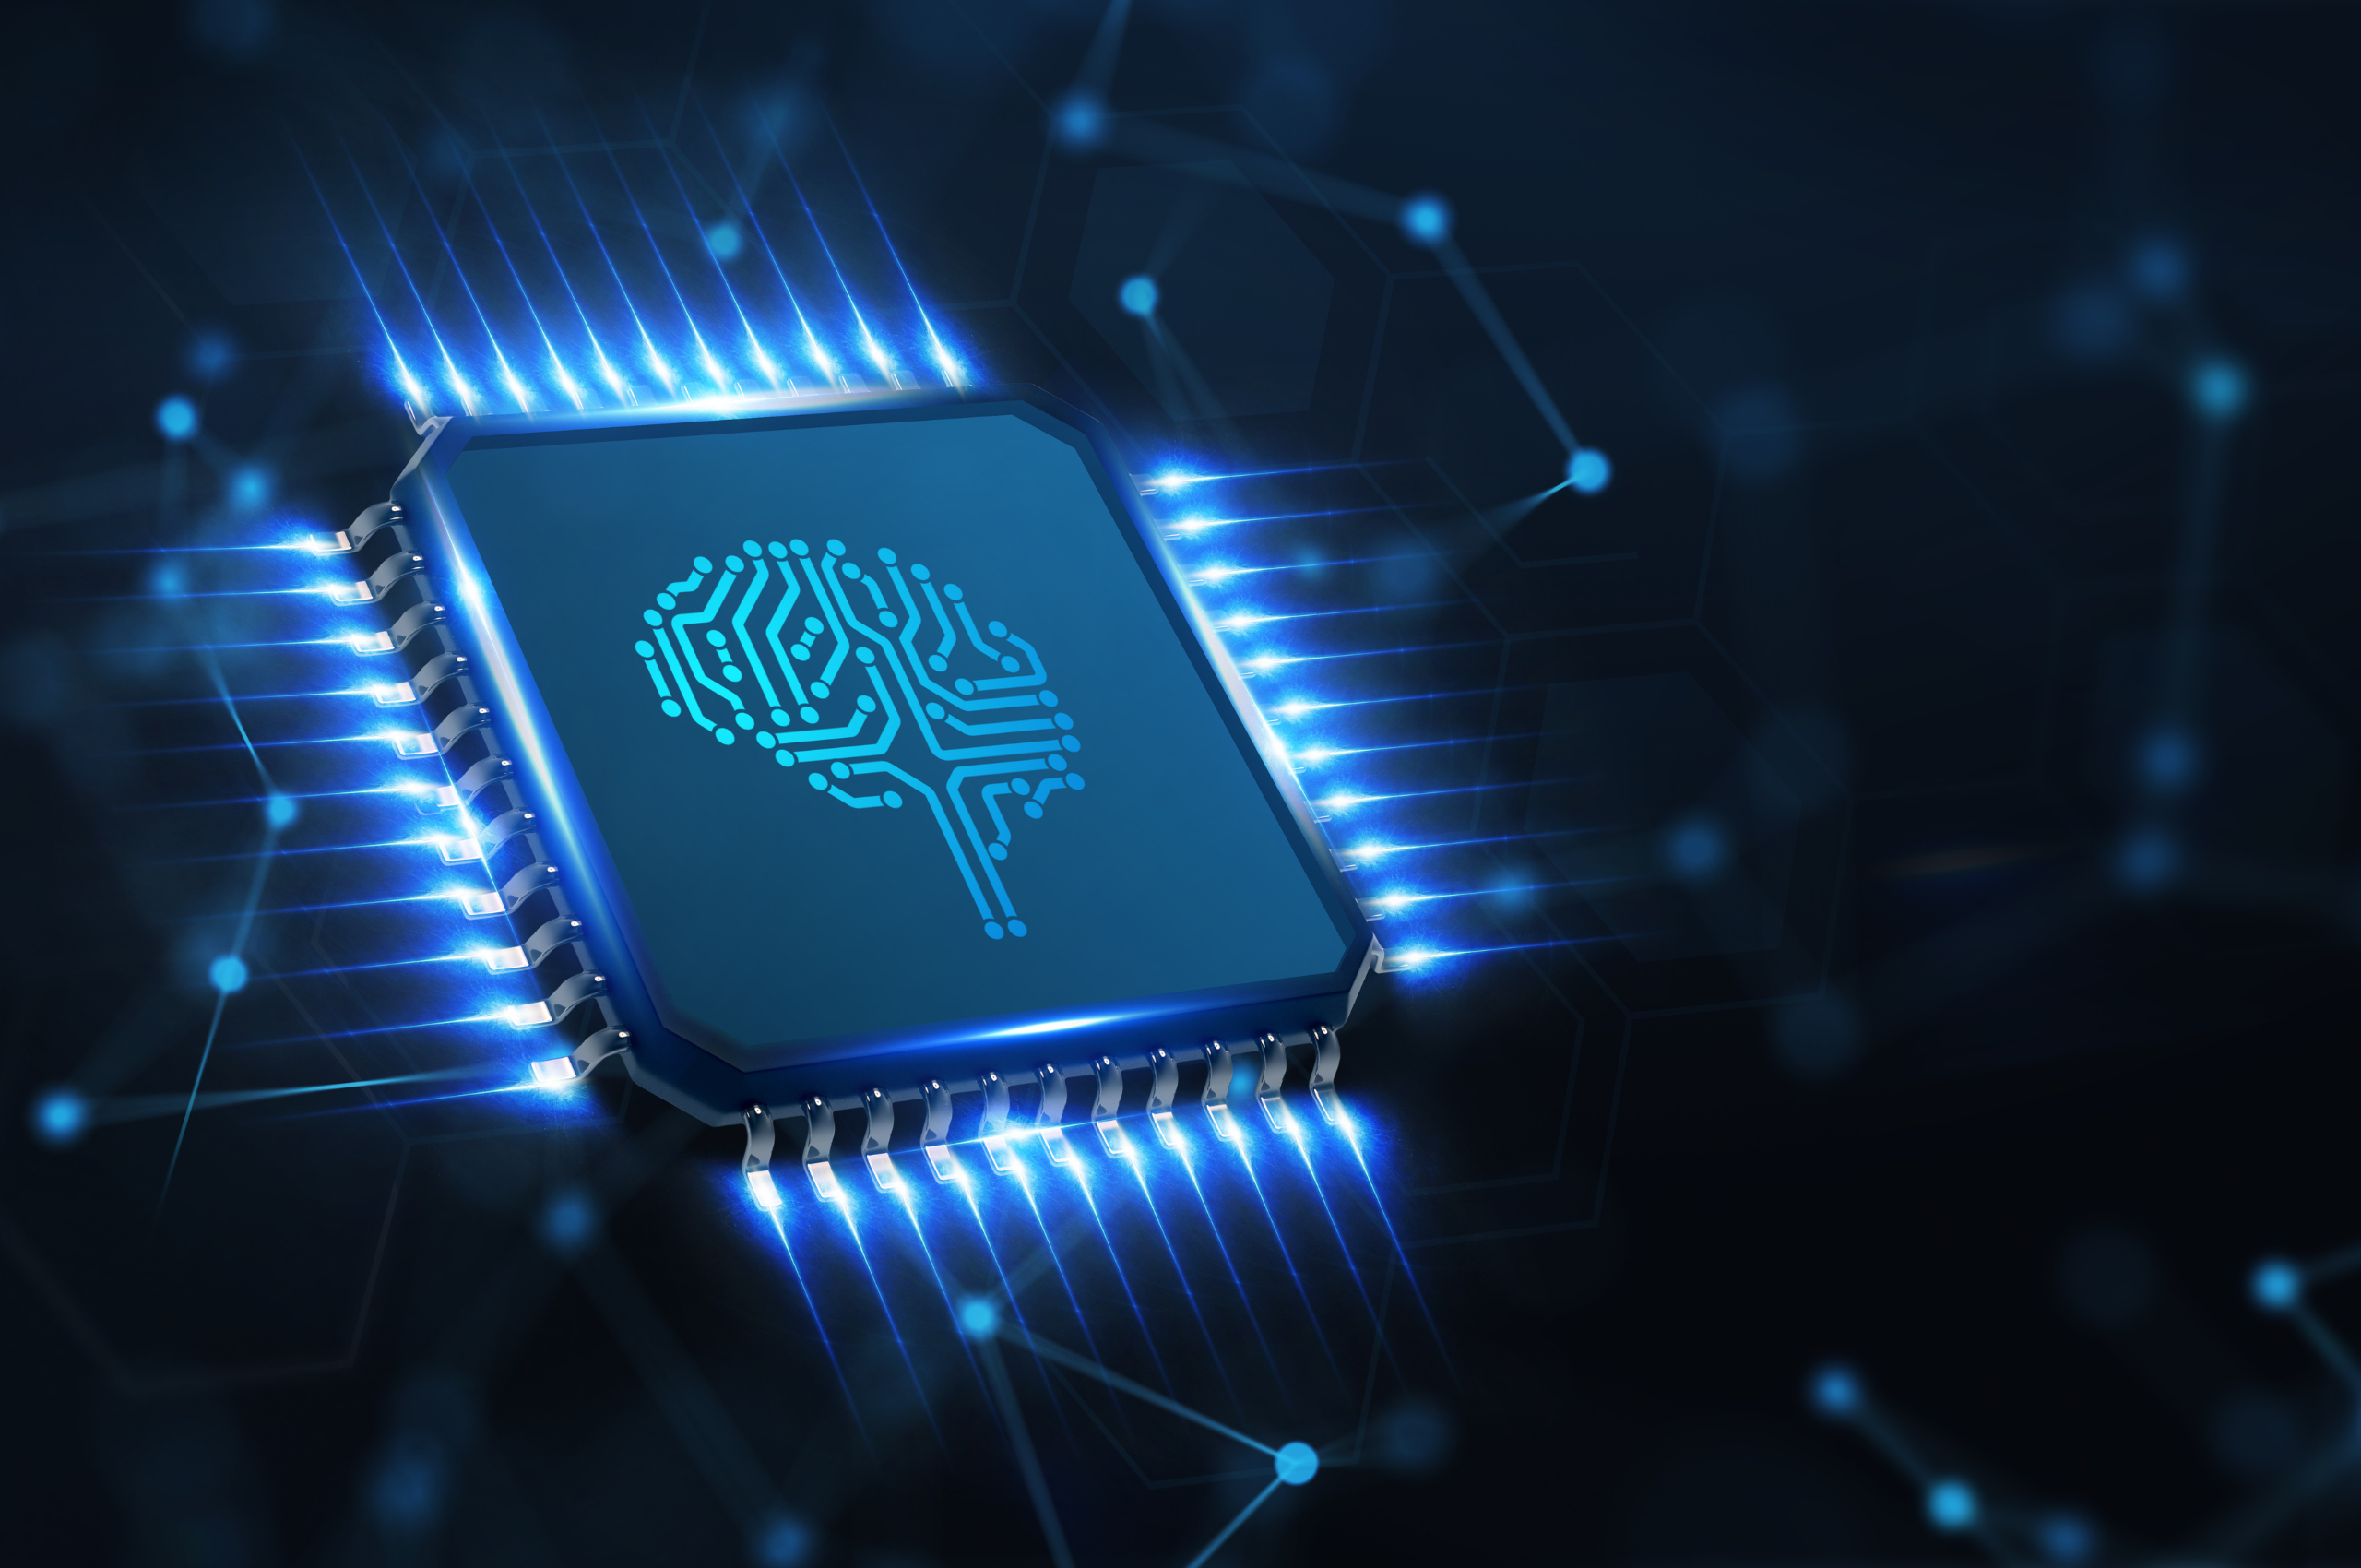 Digital technology chip with a brain. icon on the front screen. Illuminated blue lines coming off the digital chip at all angles that fade into the dark background. Dark background with faded blue line and dot connections. The Impact of Artificial Intelligence on MedTech Recruitment.